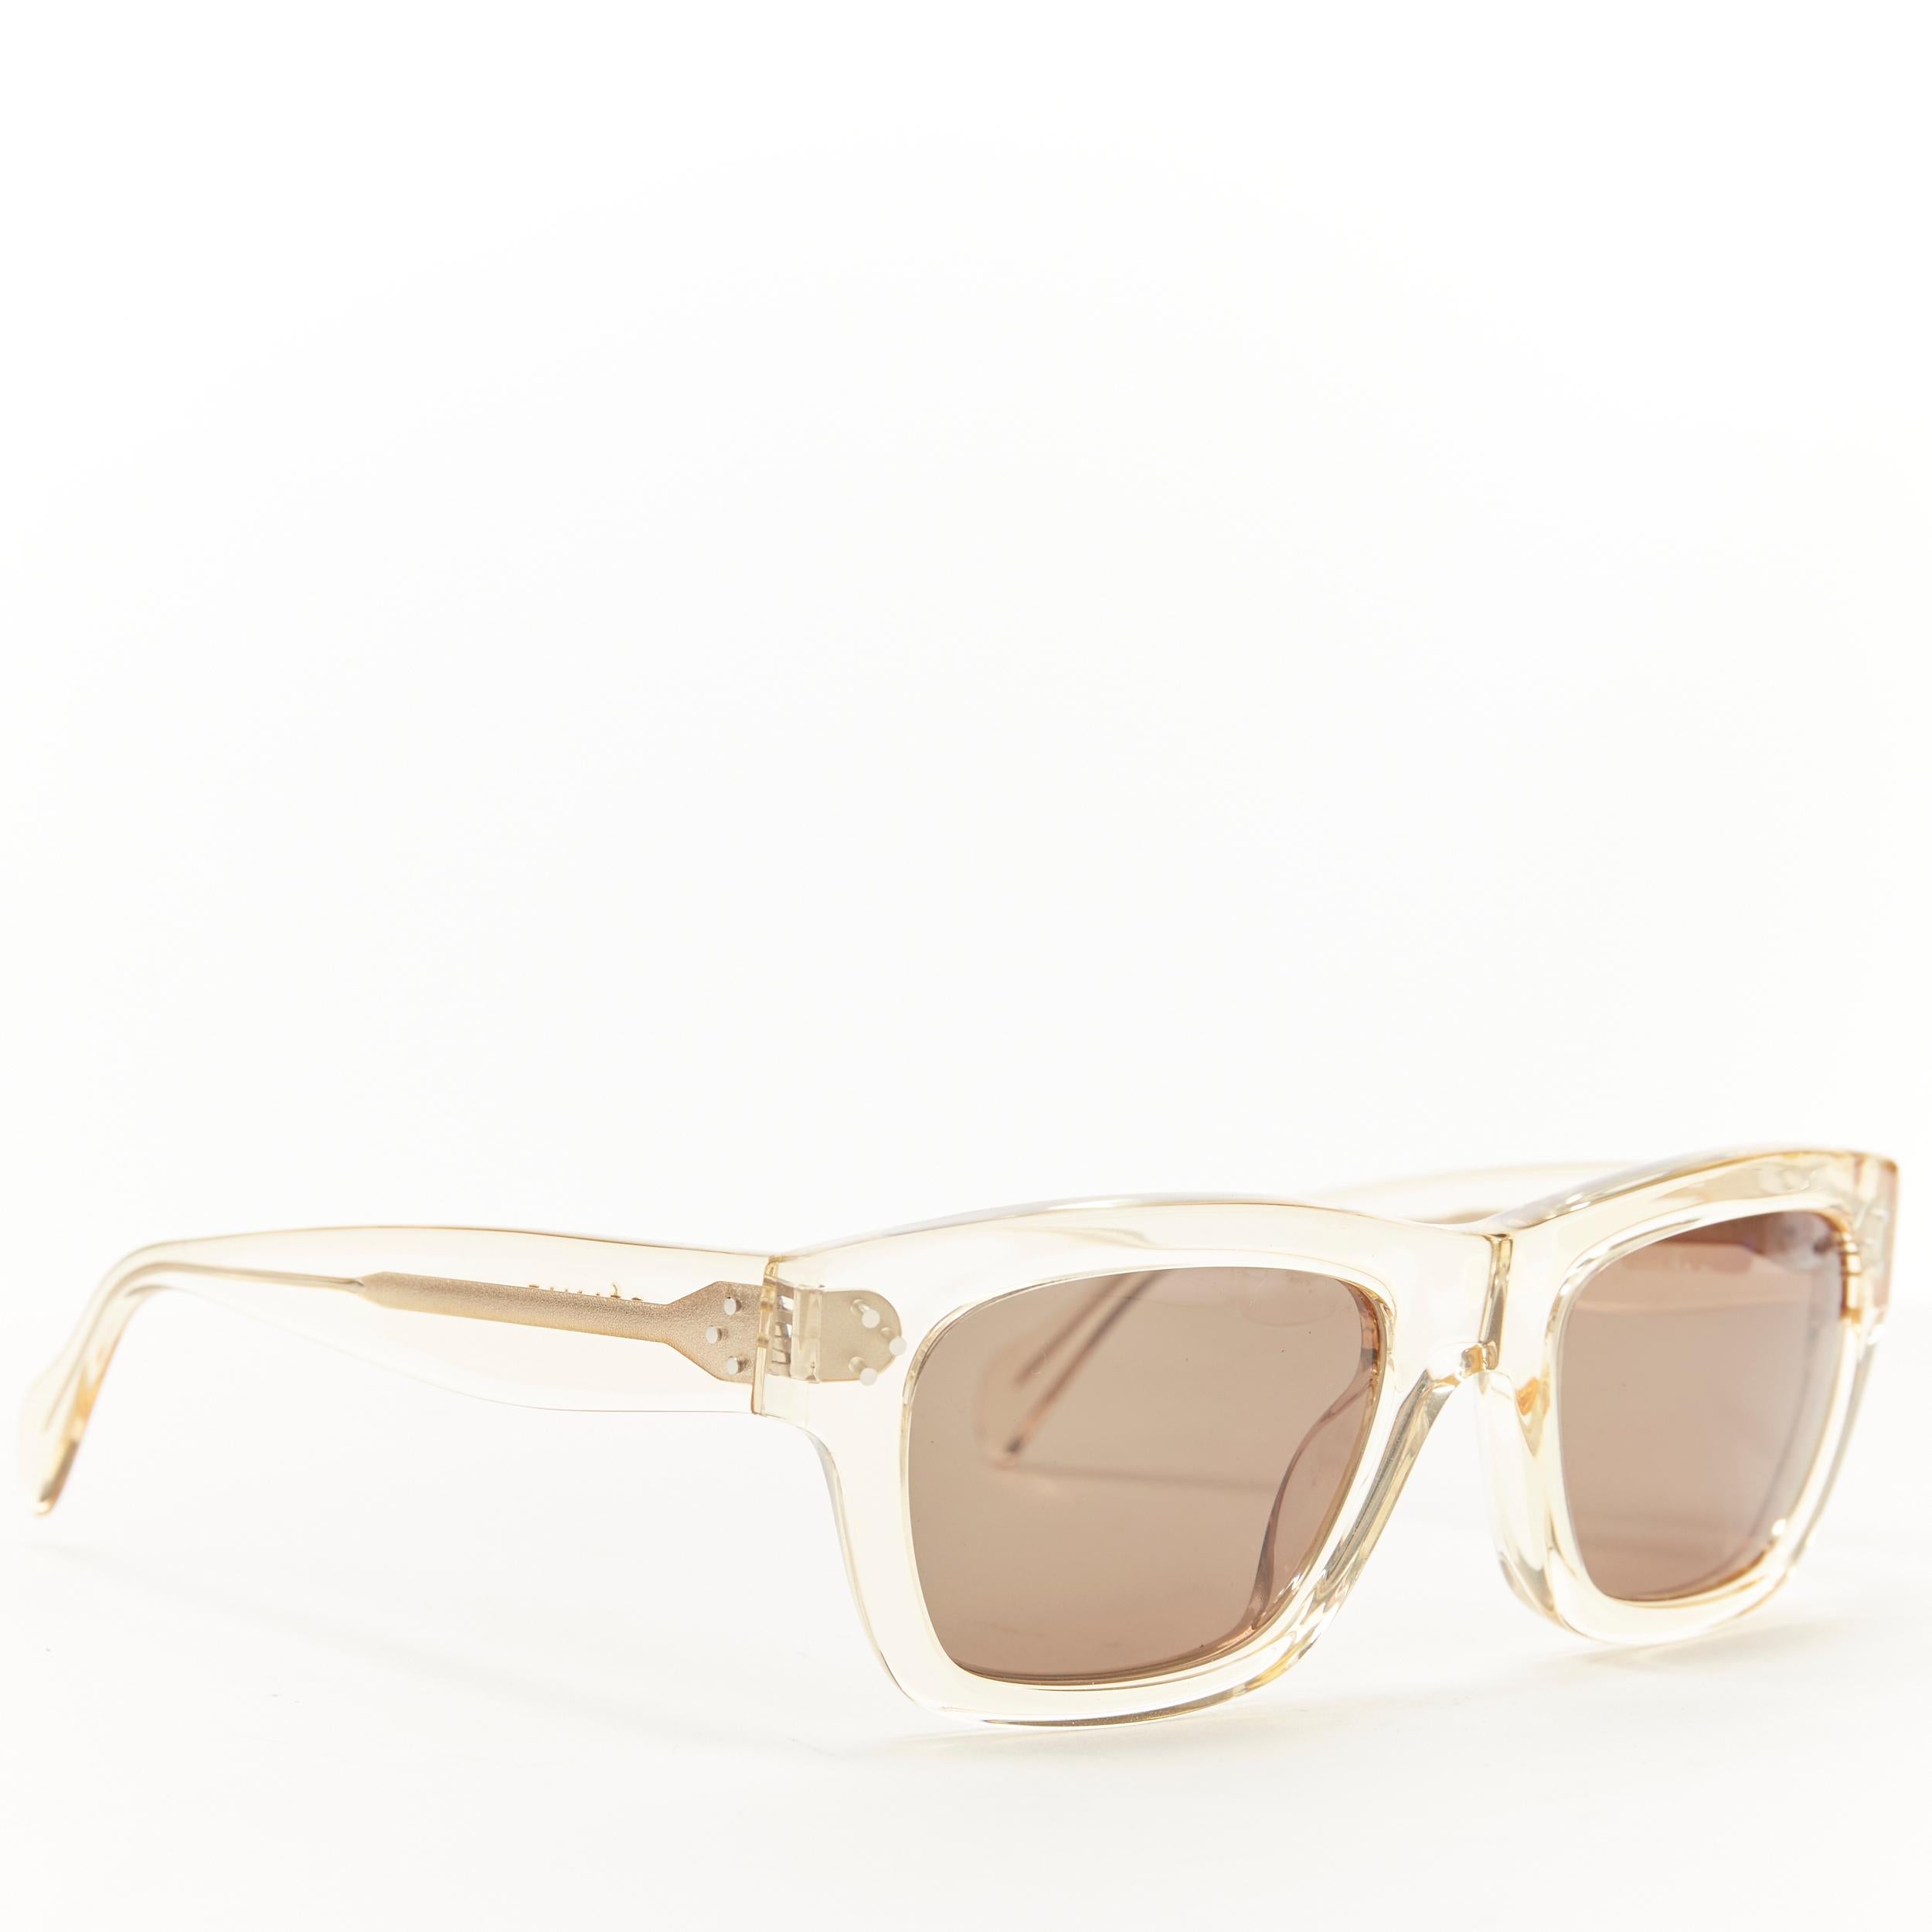 OLD CELINE yellow clear PVC frame grey lens square summer sunglasses 
Reference: AEMA/A00005 
Brand: Celine 
Designer: Phoebe Philo 
Material: Plastic 
Color: Yellow 
Pattern: Solid 
Extra Detail: Yellow tint clear frame. Grey lens. 
Made in: Italy